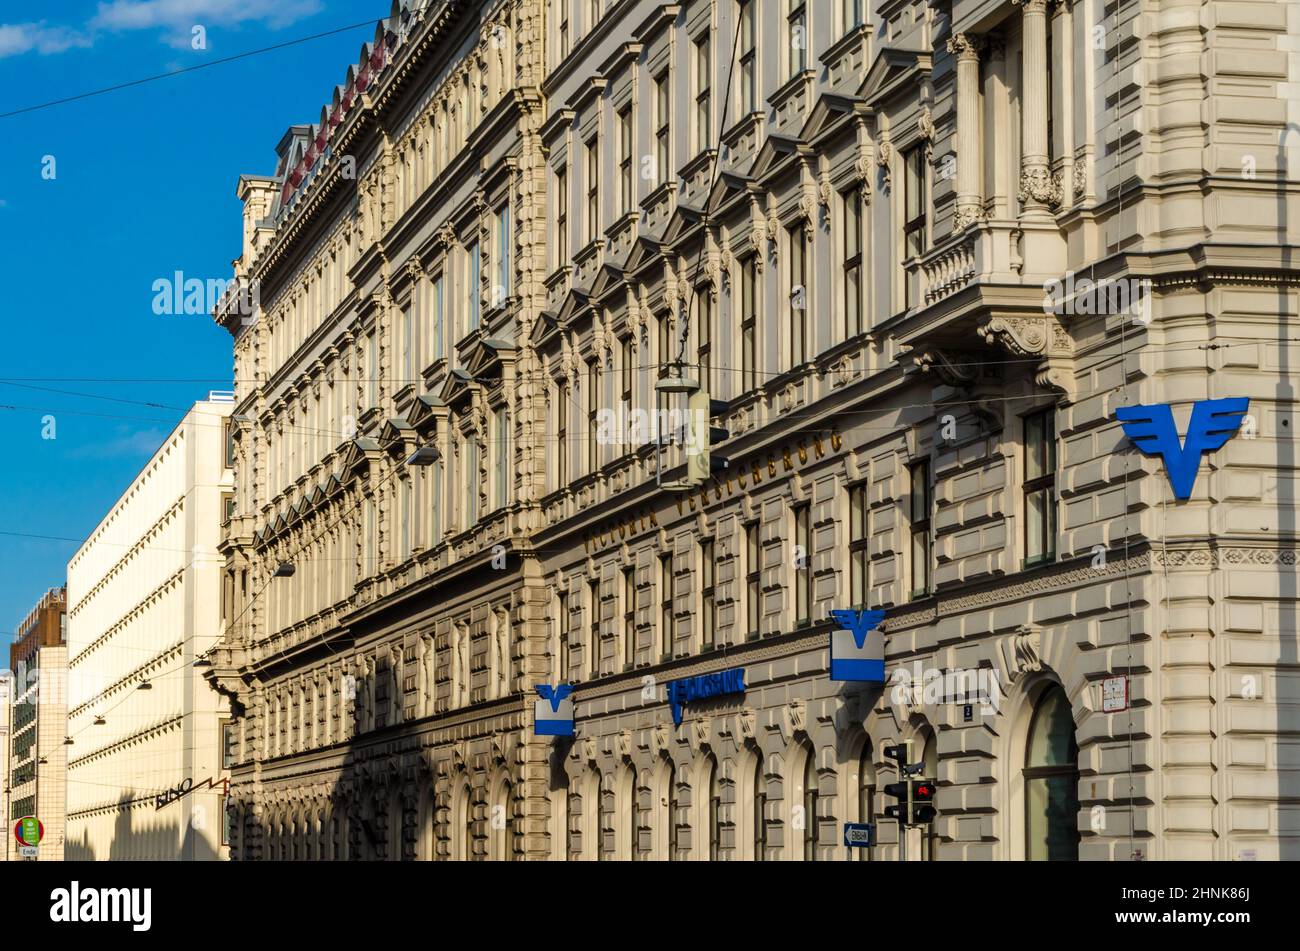 VIENNA, AUSTRIA - SEPTEMBER 1, 2013: Facade of a Volksbank in Vienna, Austria. Volksbank (German for 'people's bank') was founded in 1850 and is a Central European retail bank based in Vienna, Austria Stock Photo